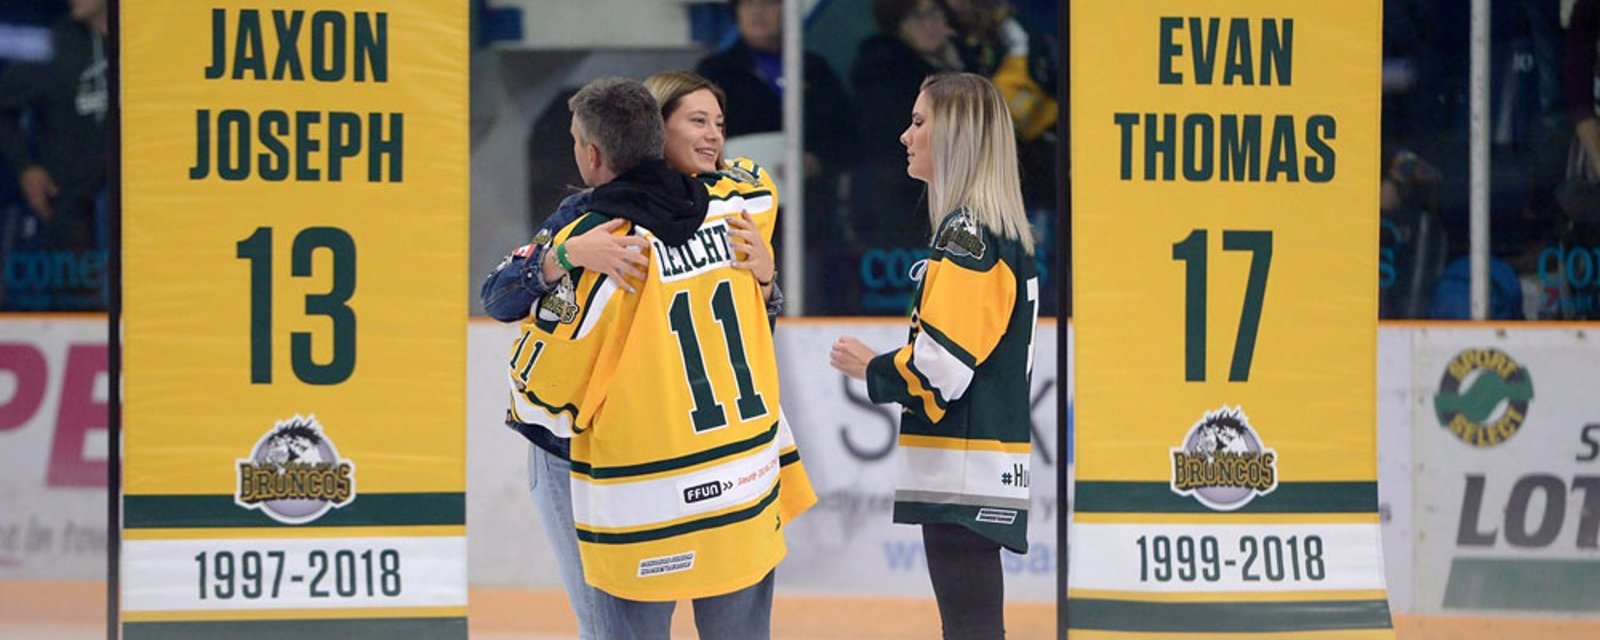 Former NHLer Joseph fighting for his son’s legacy after Humboldt Broncos tragedy